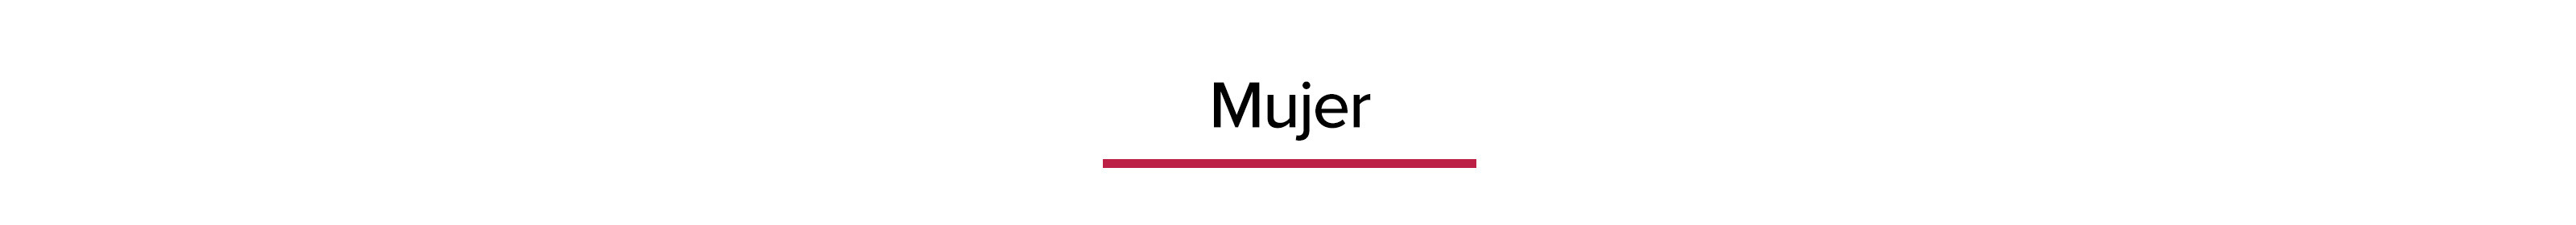 FW_mujer 